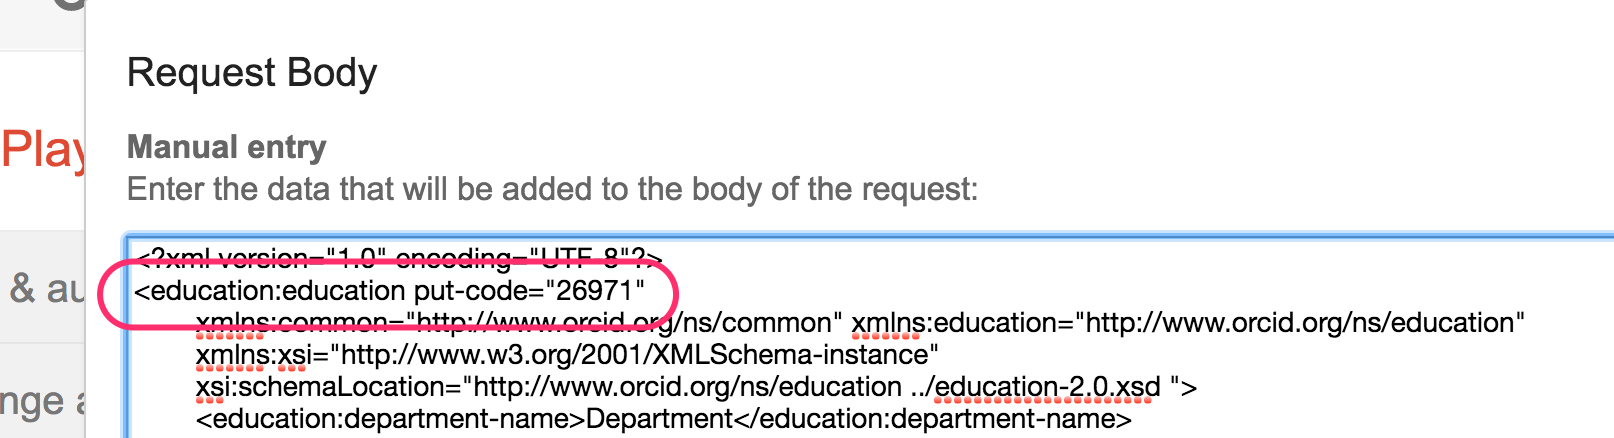 Google OAuth Playground Request Body configuration for updating an education affiliation showing where to place put-code